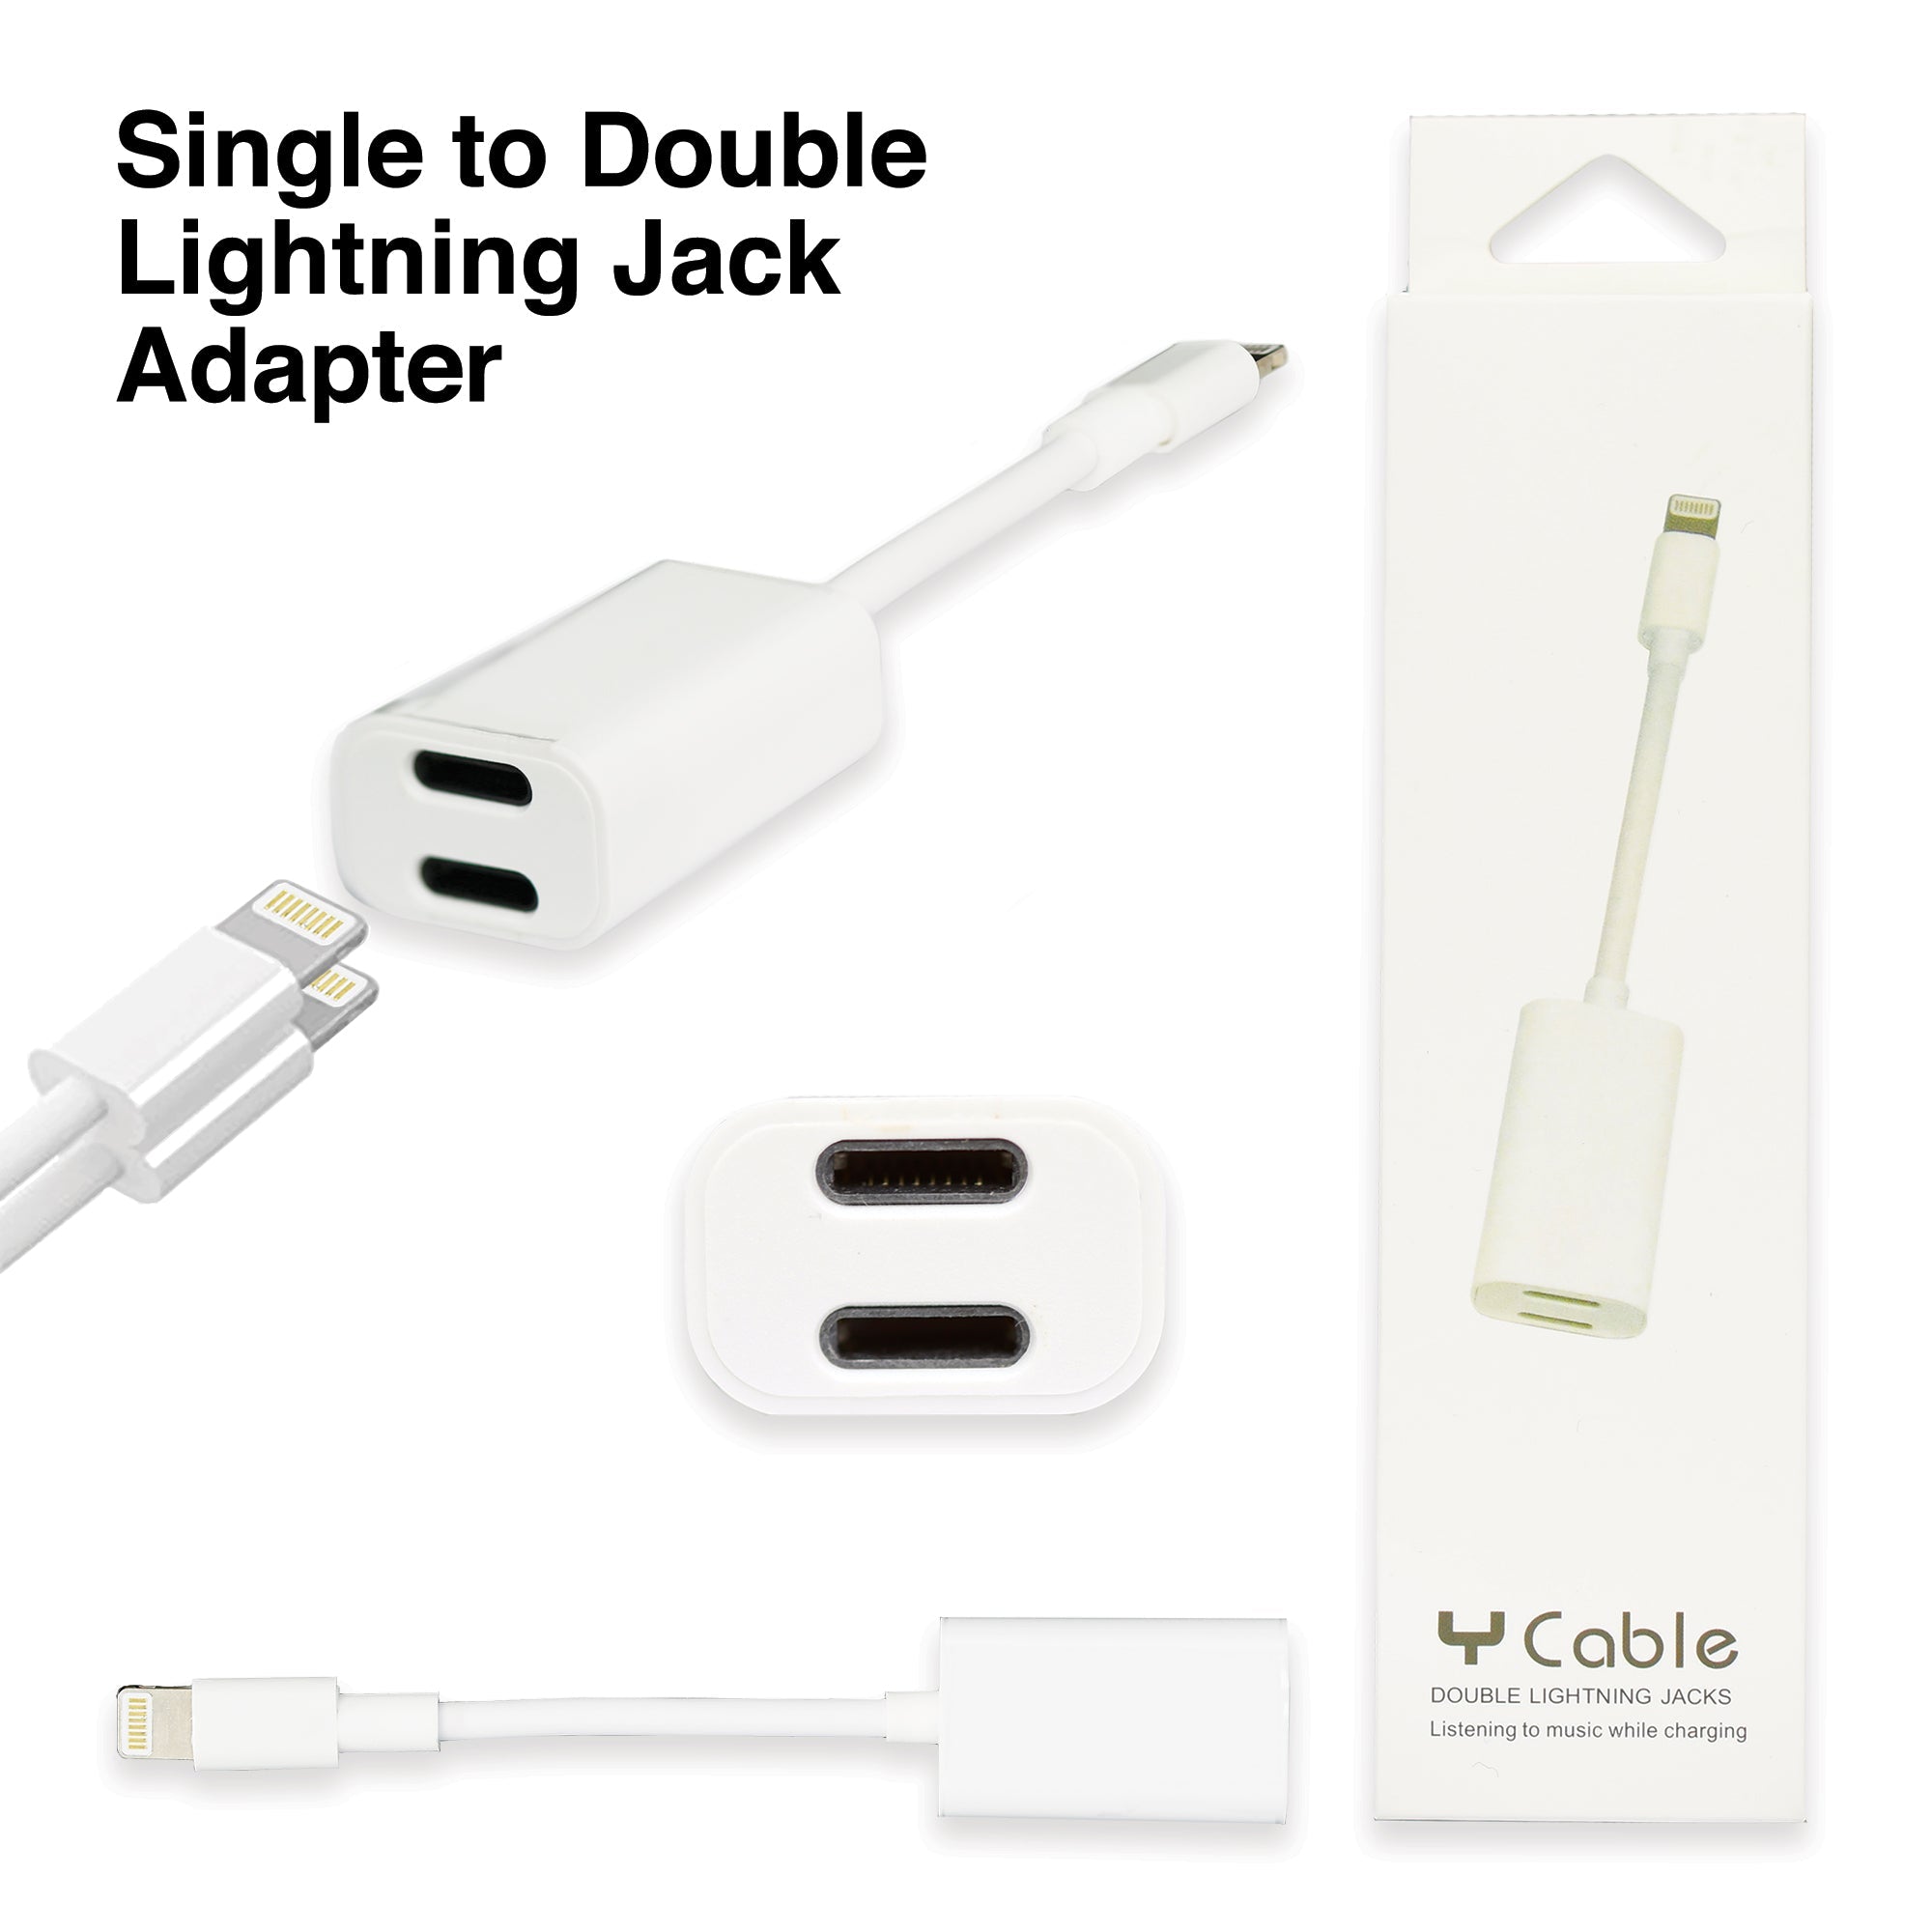 2 in 1 Double Lightning Adapter for iPhone 11/11 Pro /11 Pro Max/ Xs Max/ X / XS/ 8 / 7